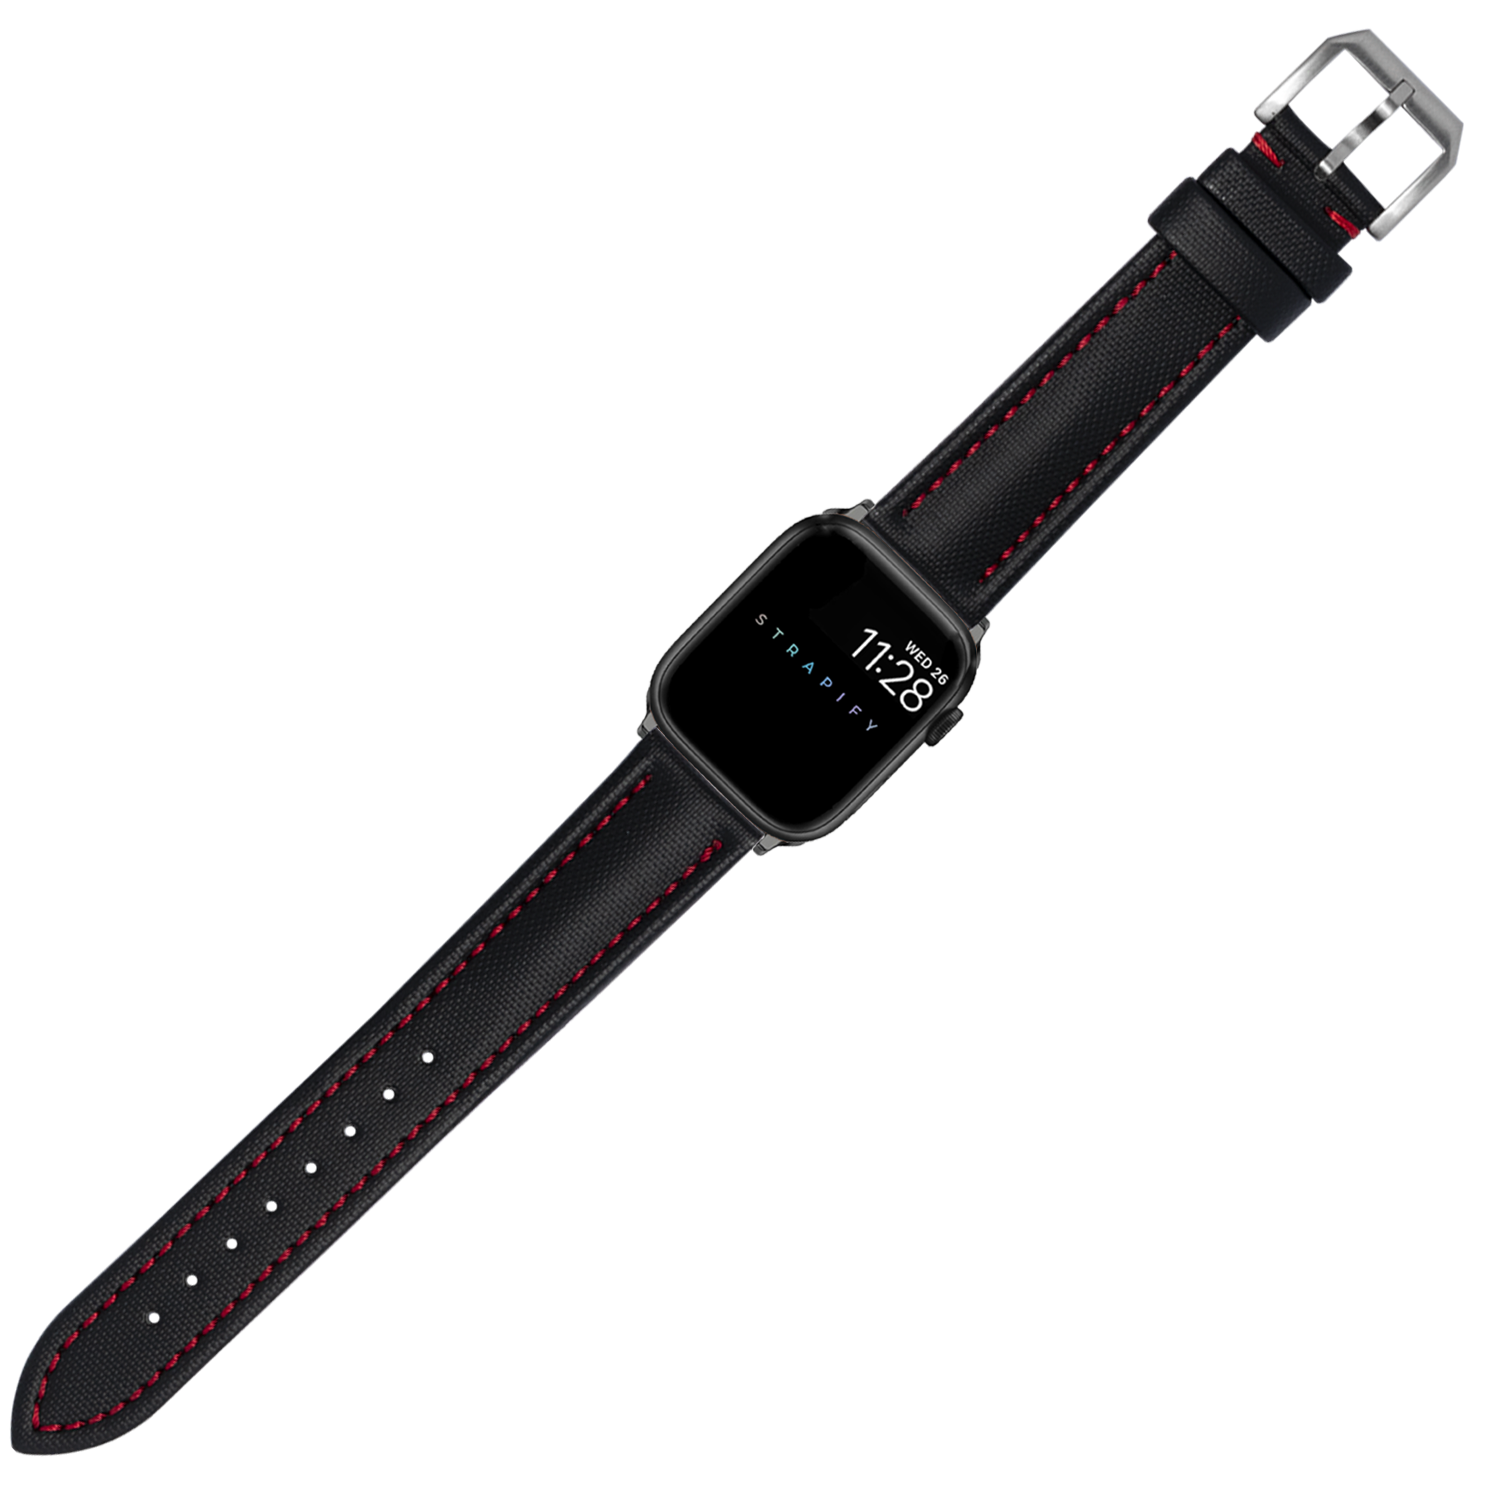 [Apple Watch] King Sailcloth - Black with Red Stitching